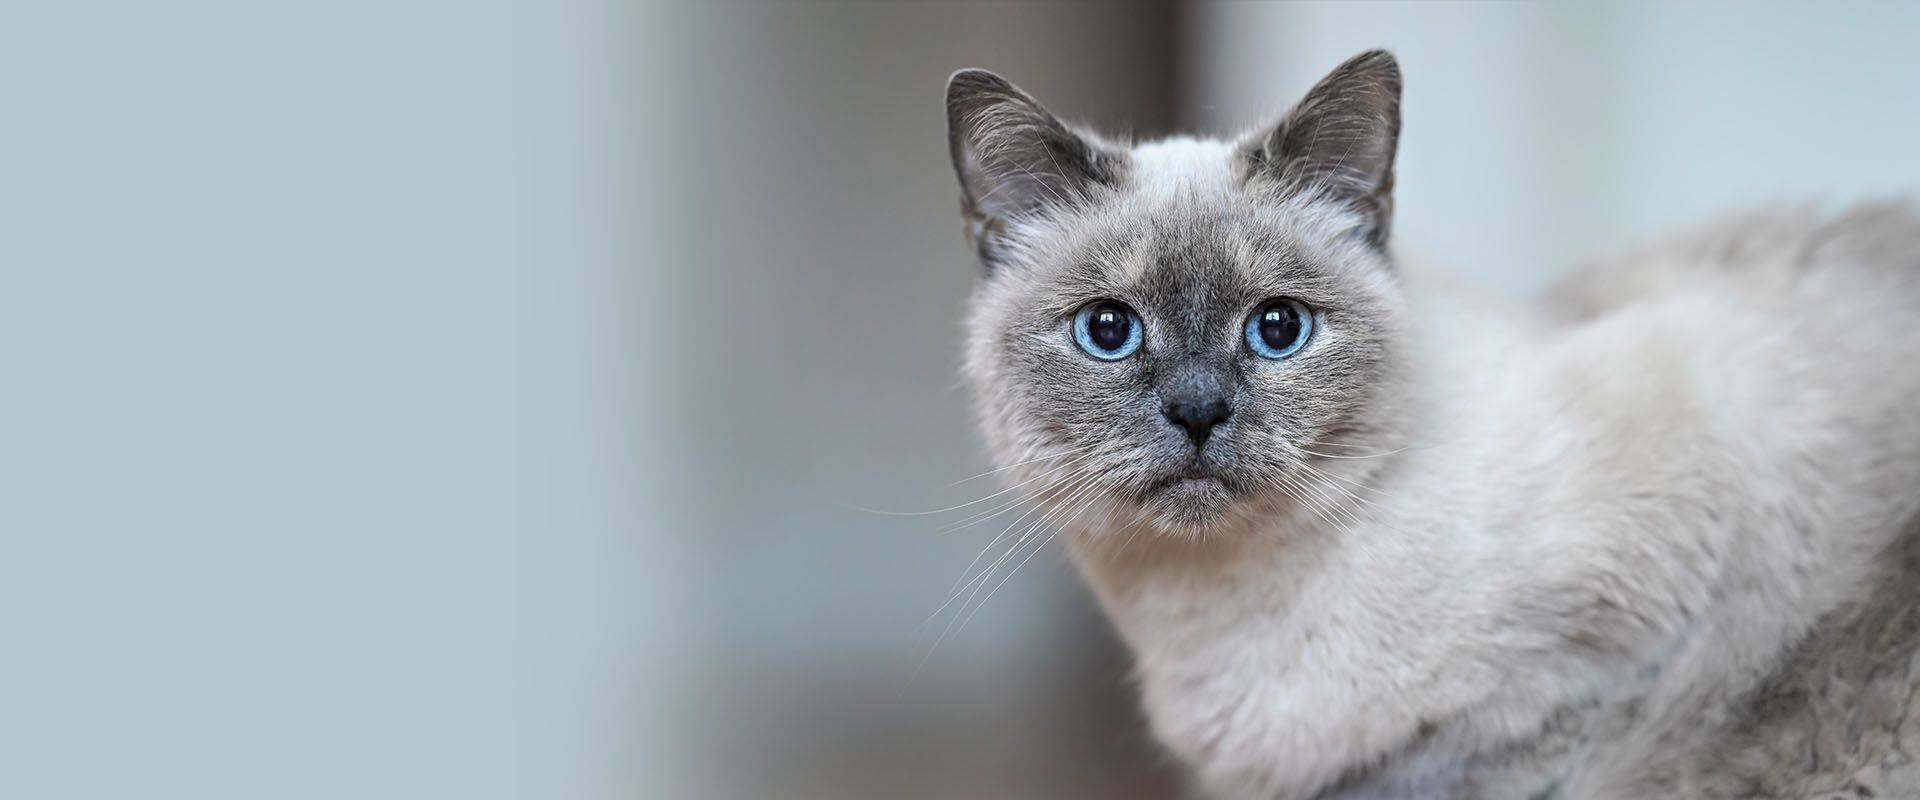 Gray cat with striking blue eyes